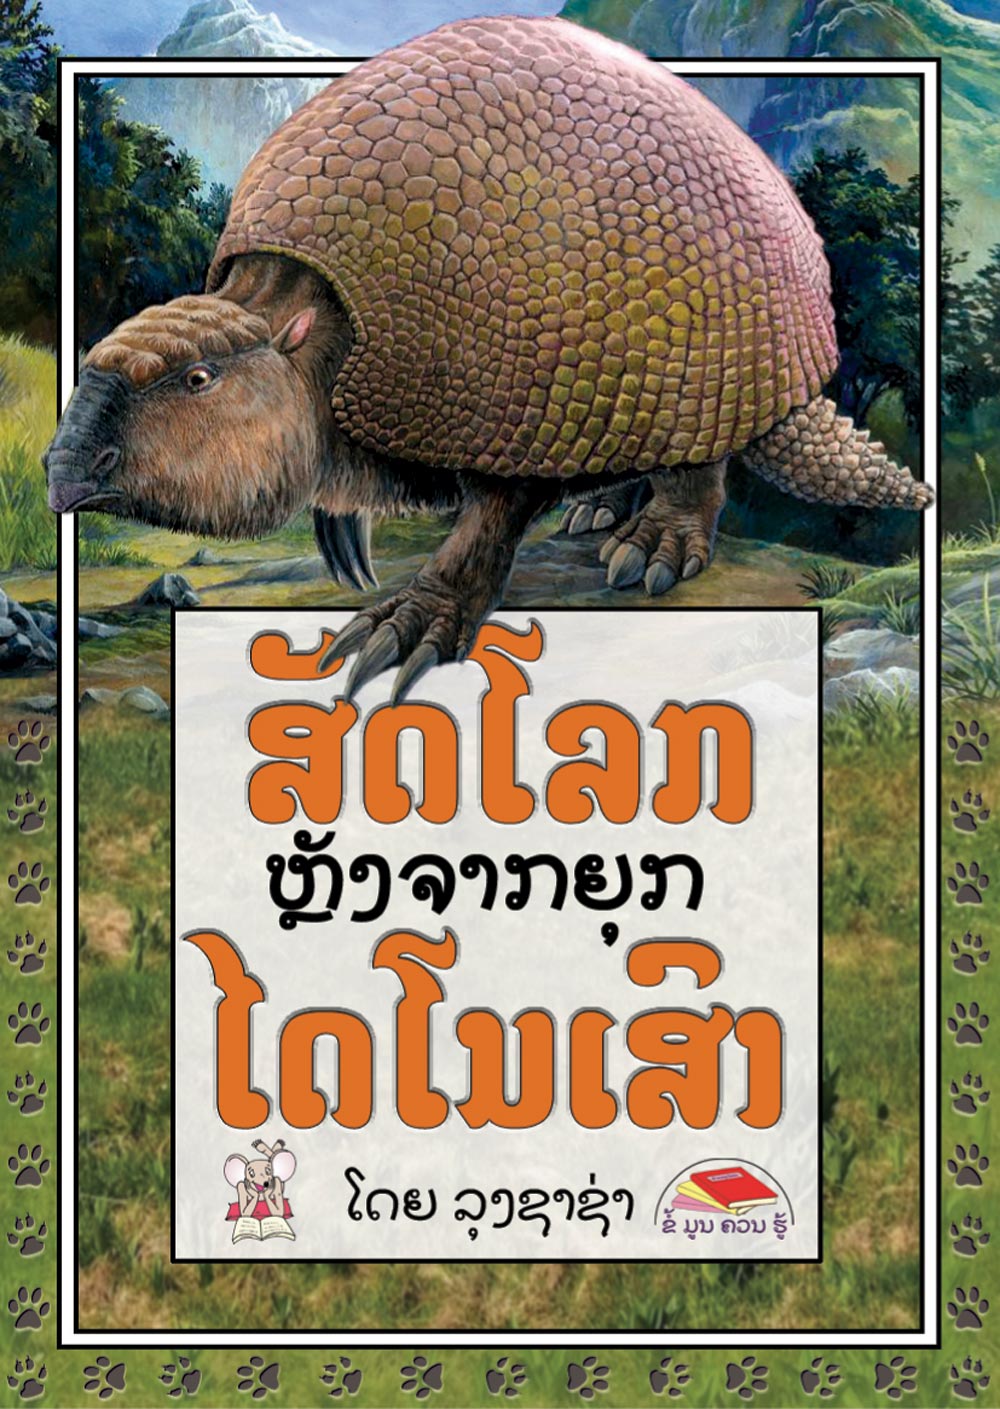 After the Dinosaurs large book cover, published in Lao language